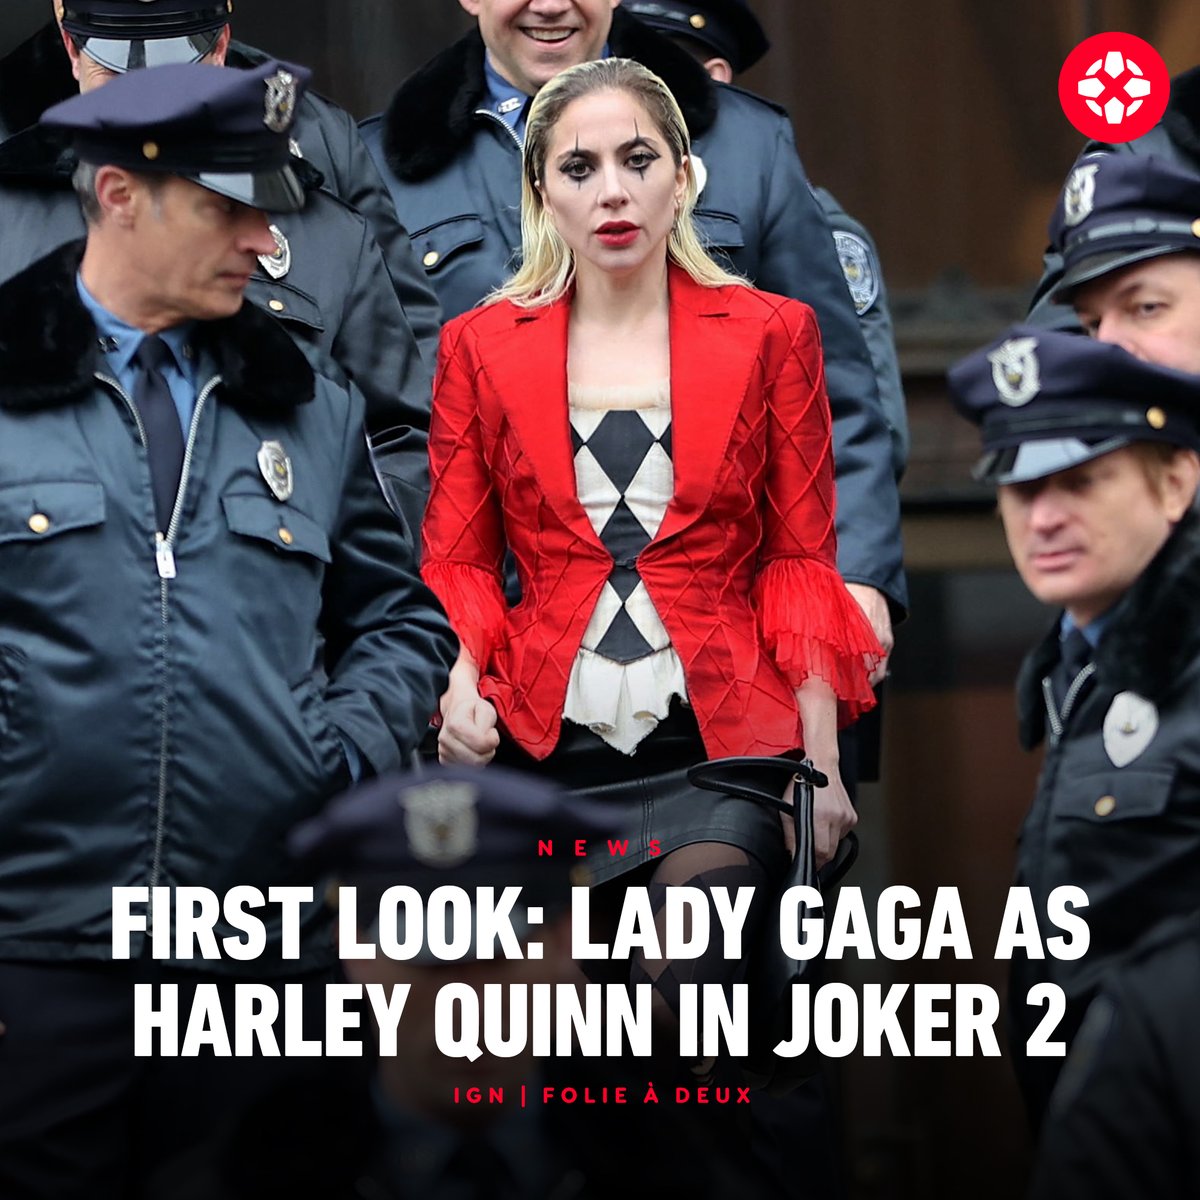 New photos from the New York set of Joker: Folie à Deux show Lady Gaga as Harley Quinn, accompanied by members of the Gotham PD.